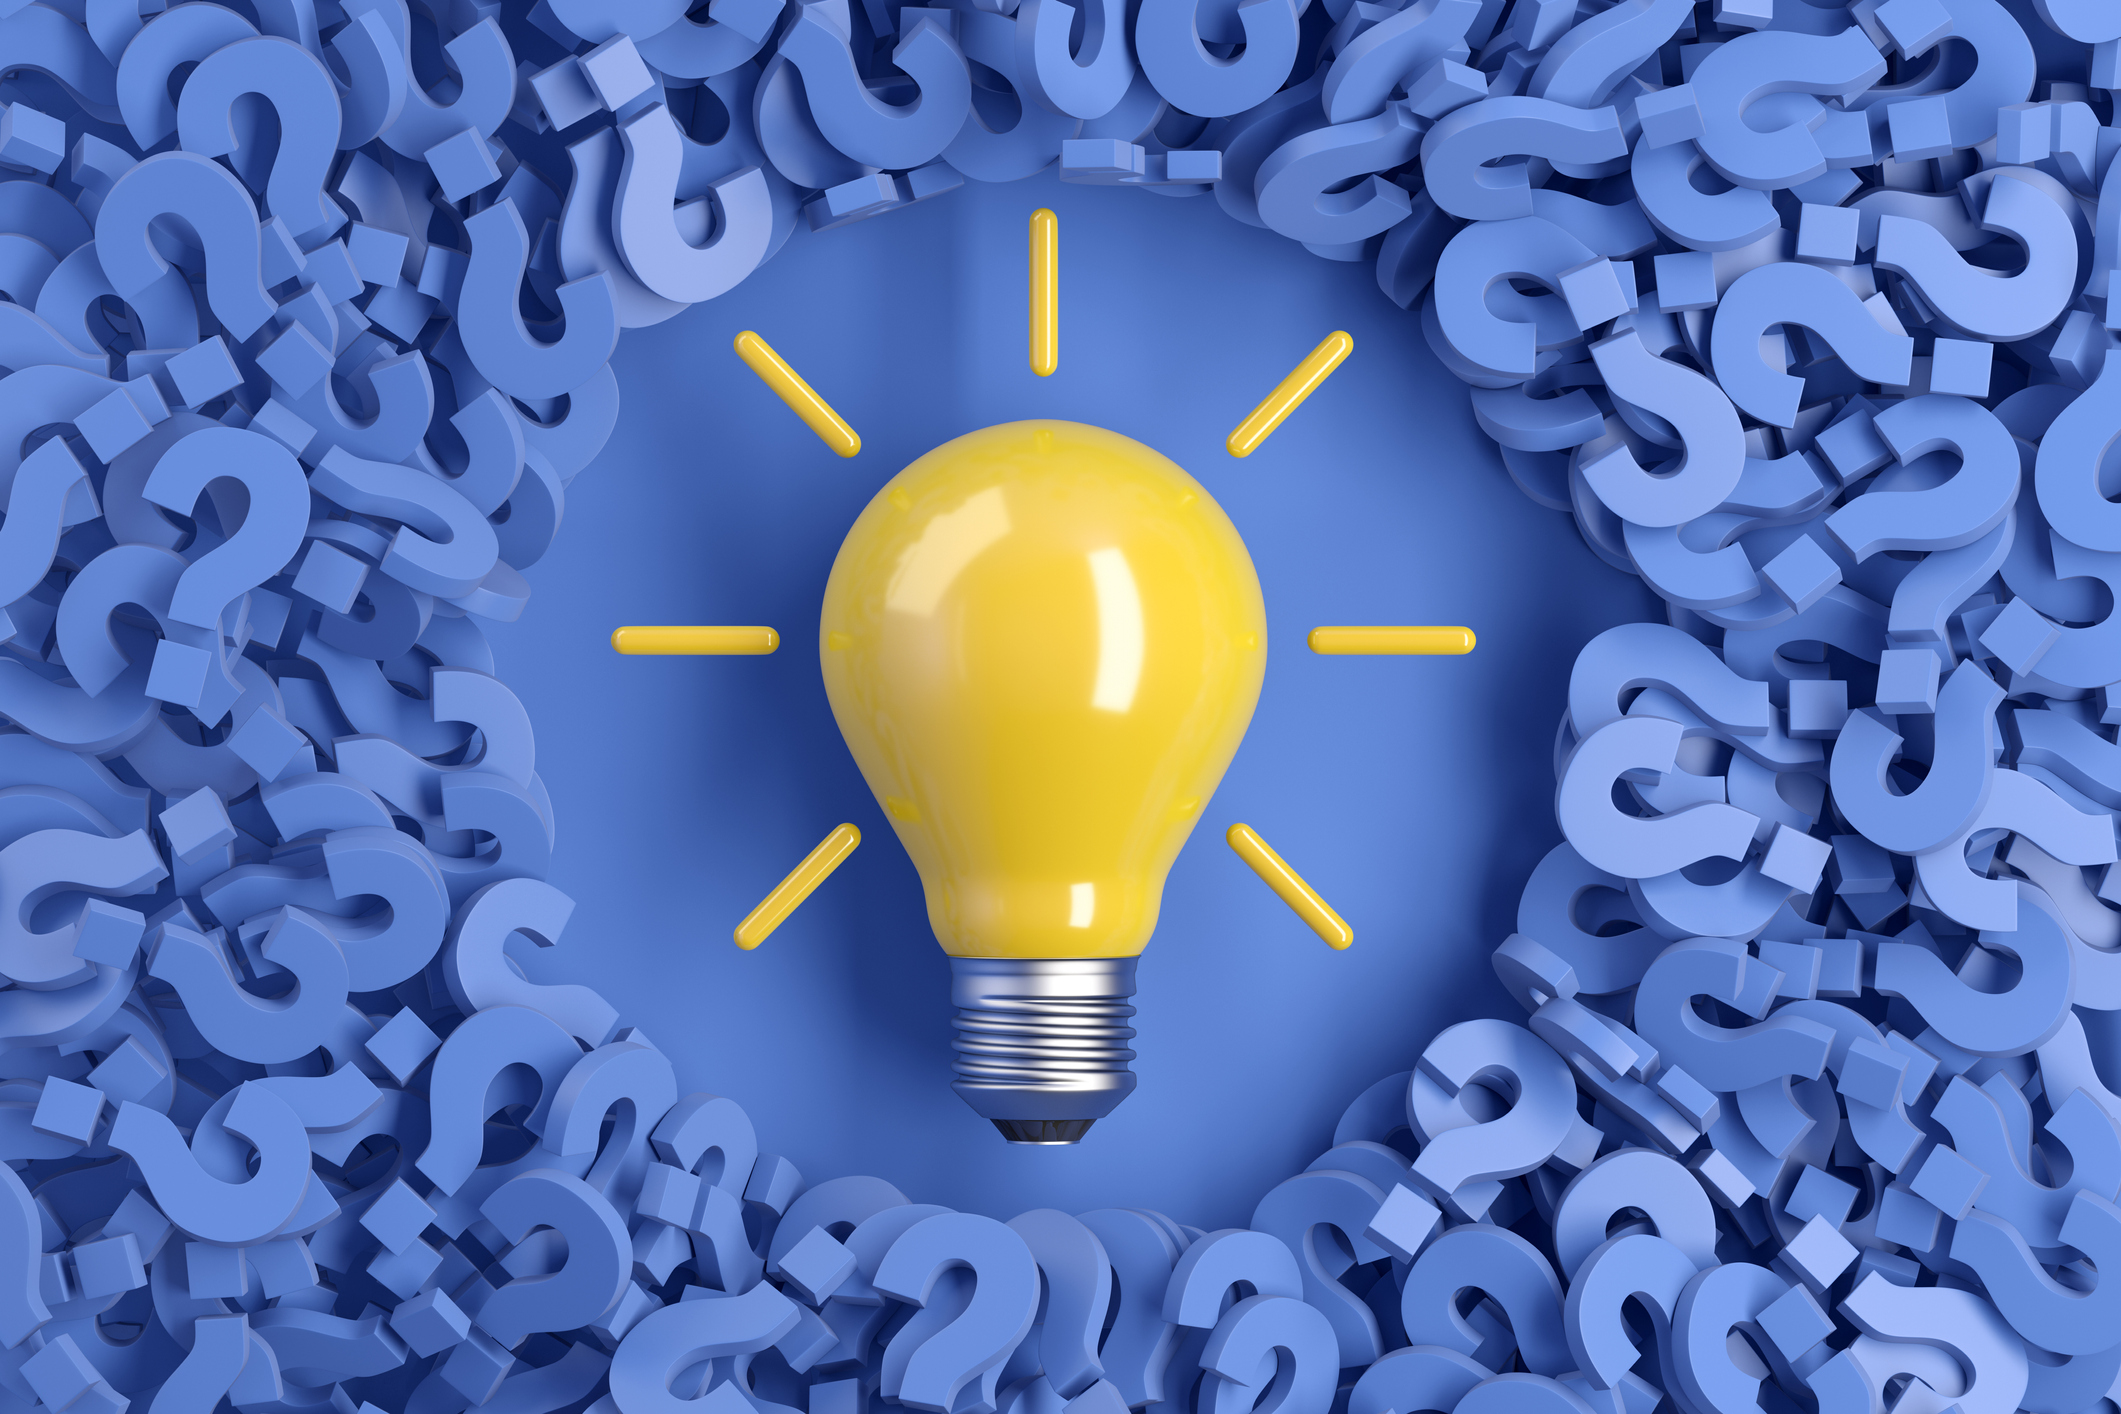 A yellow lightbulb surrounded by blue question marks.